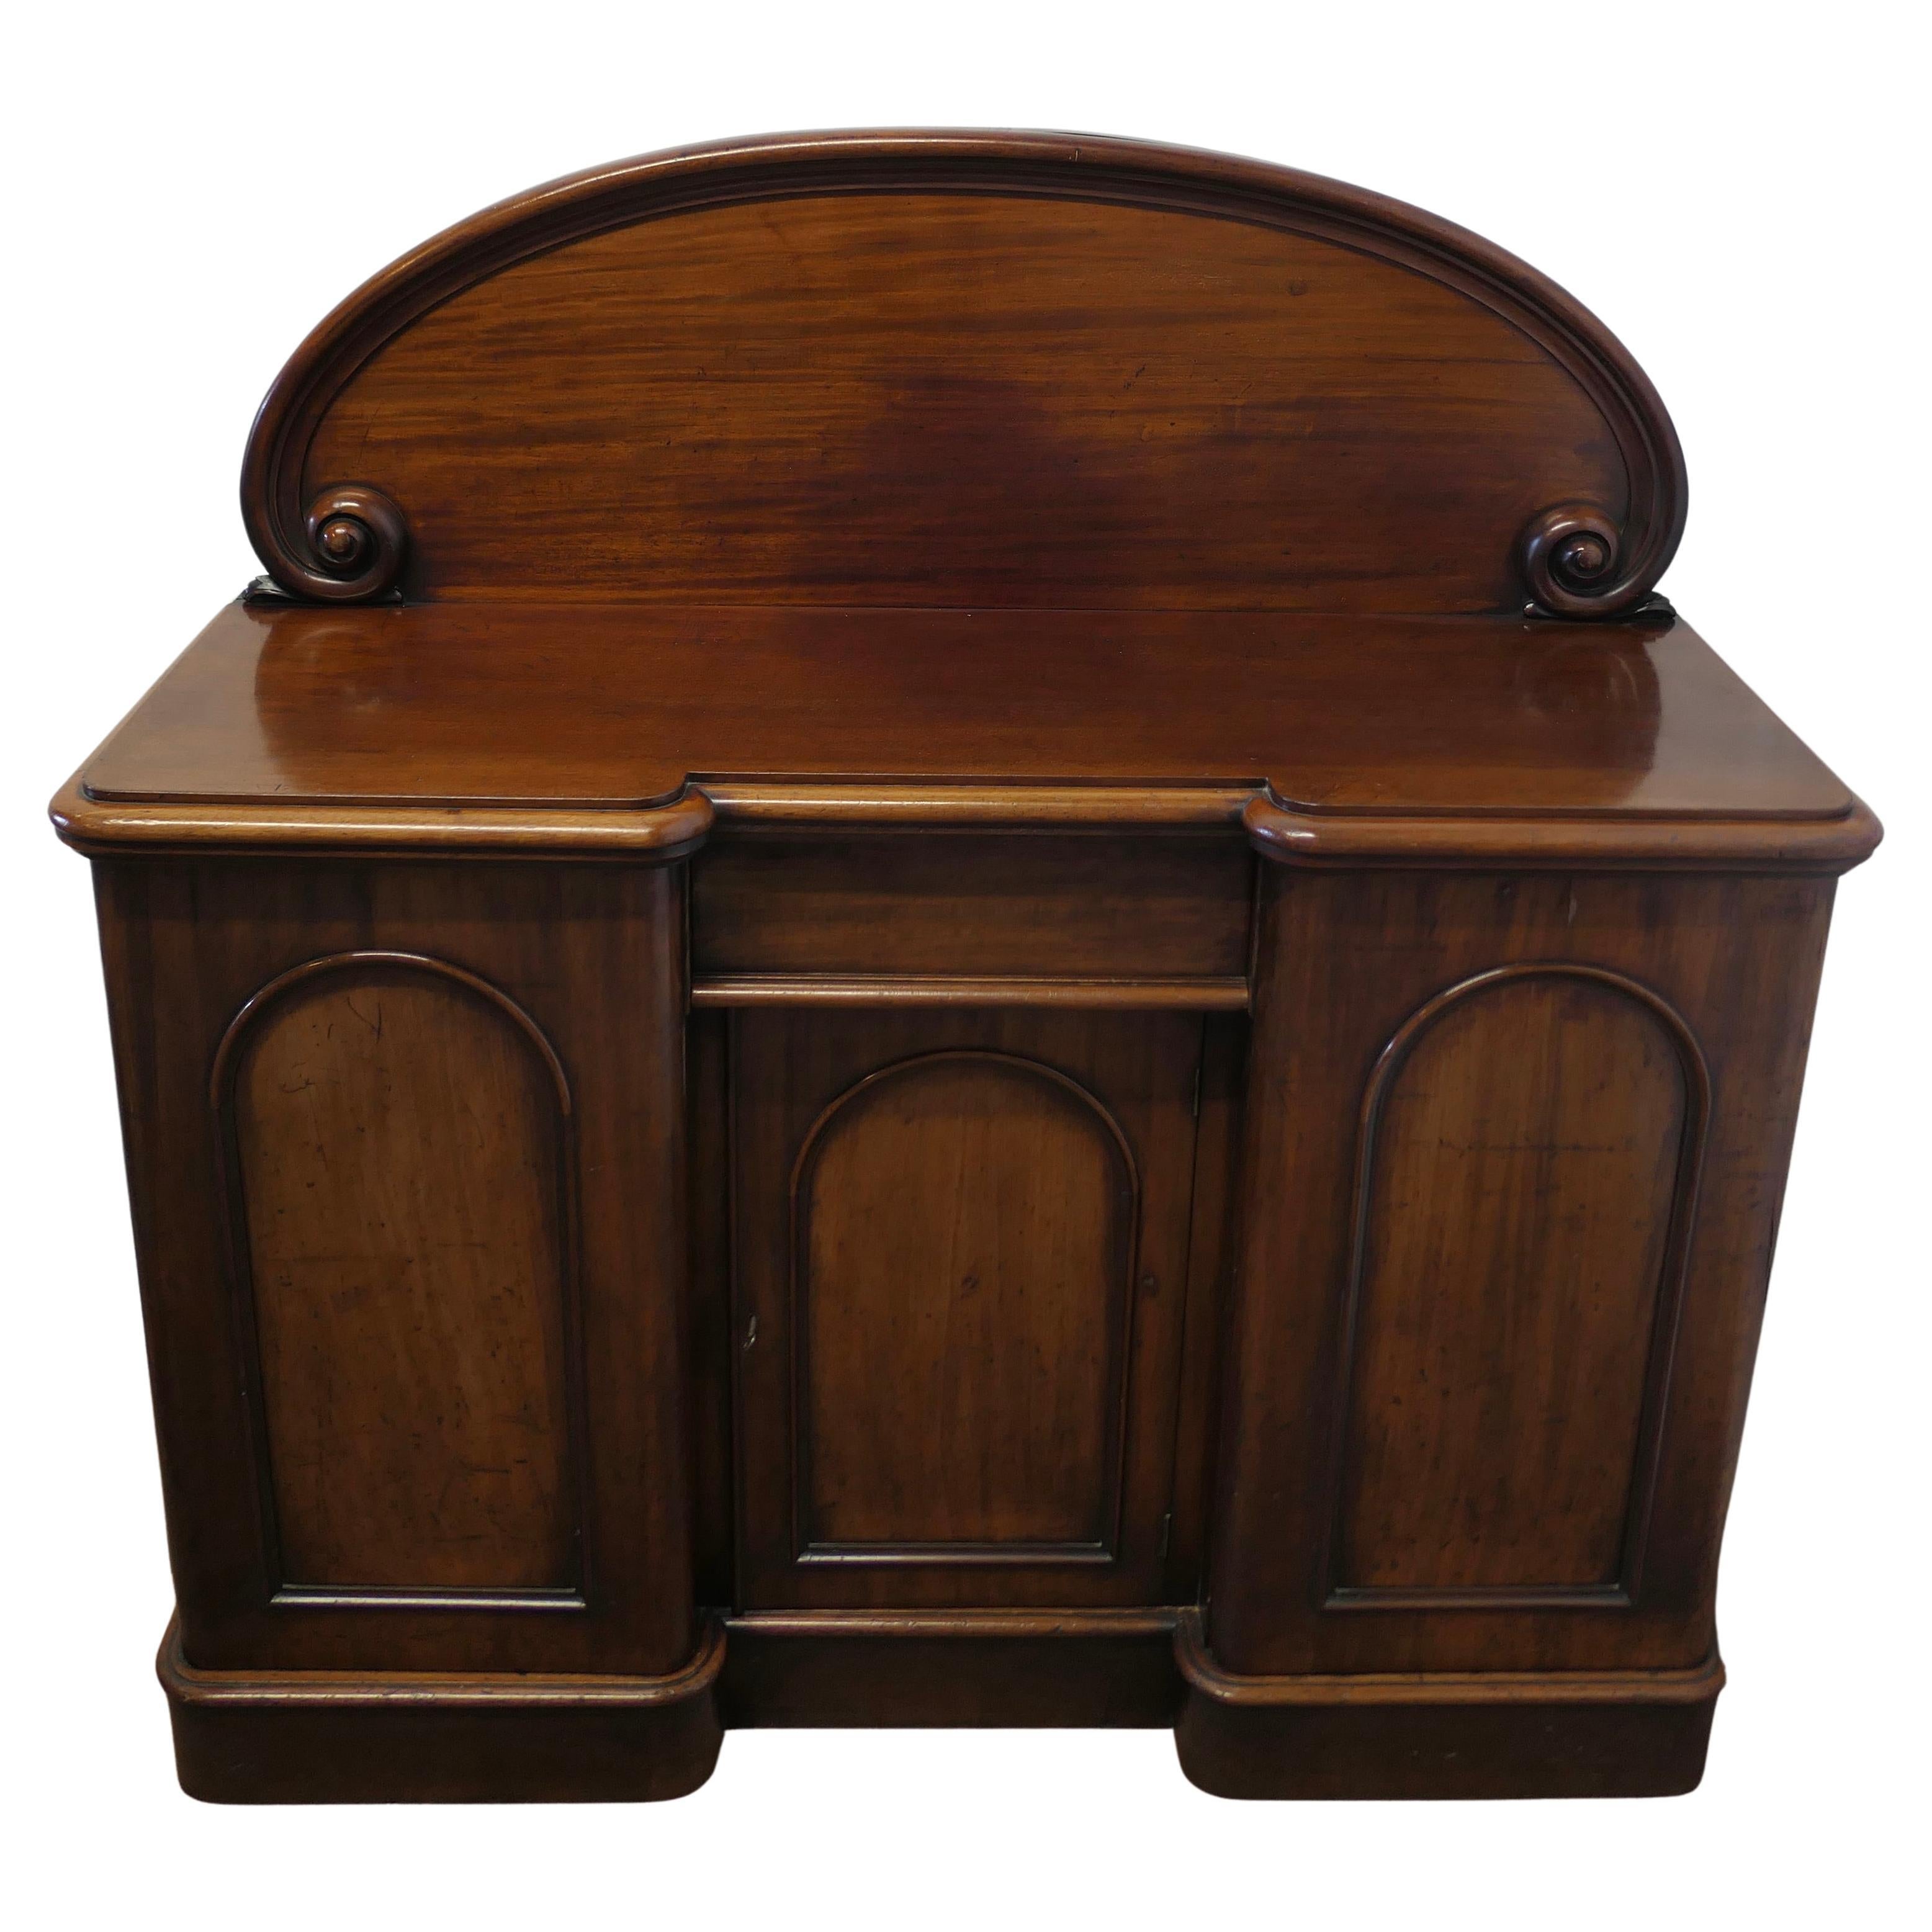 A Medium Size Victorian Sideboard or Chiffonier    For Sale